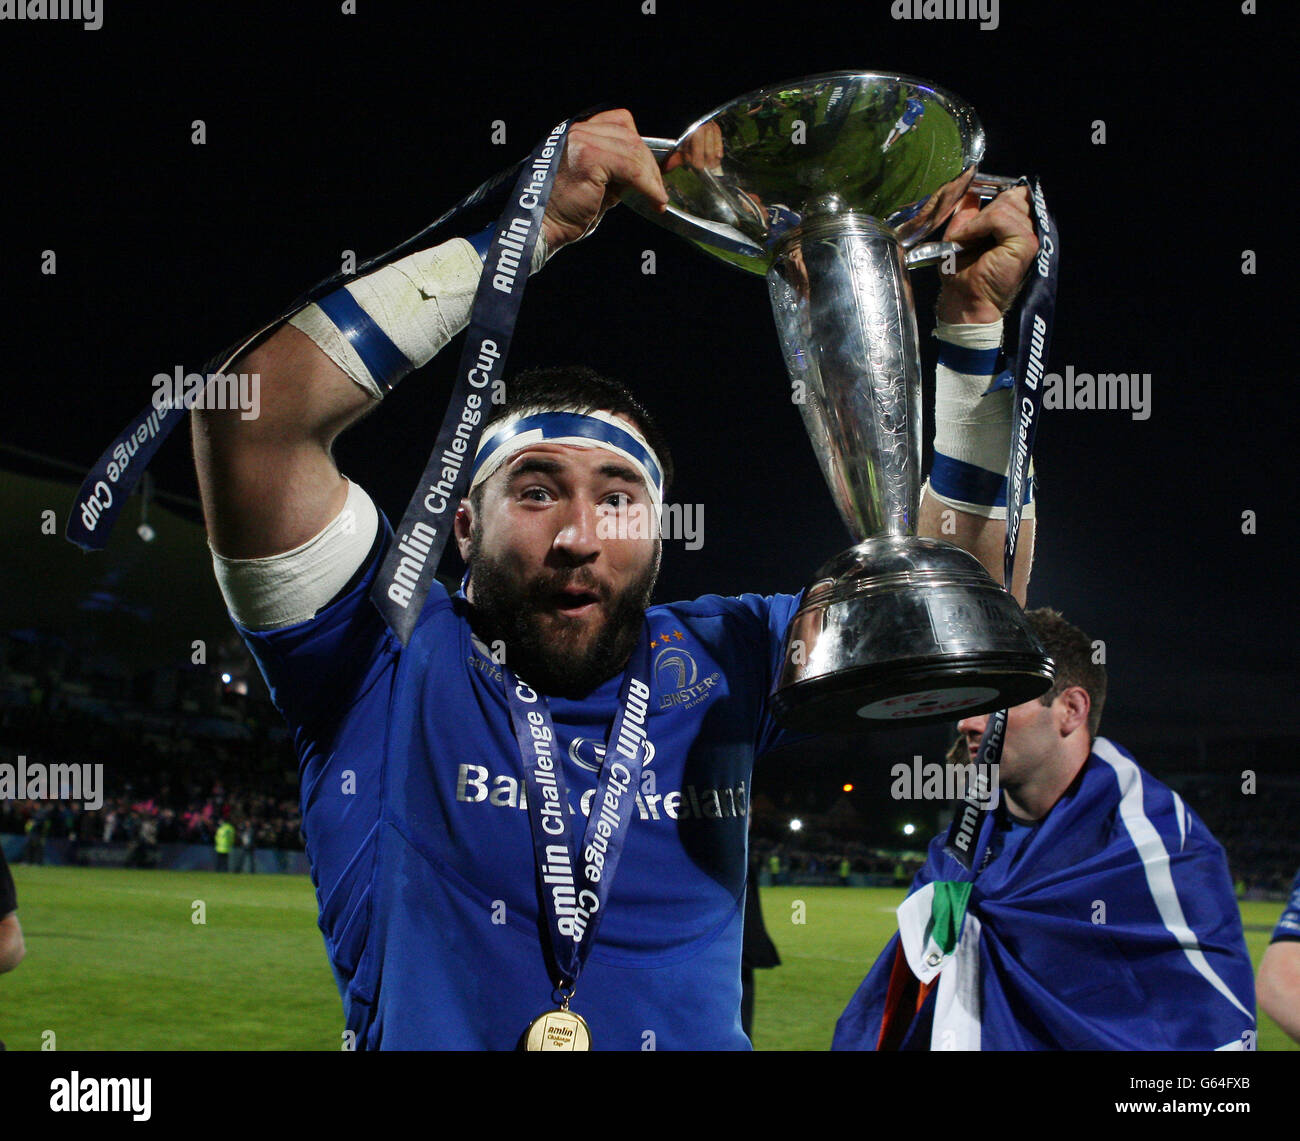 Leinster's Jamie Hagan celebrates following the Amlin Challenge Cup Final match at the RDS, Dublin. PRESS ASSOCATION Photo. Picture date: Friday May 17, 2013. See PA story RUGBYU Cup. Photo credit should read: Artur Widak/PA Wire Stock Photo